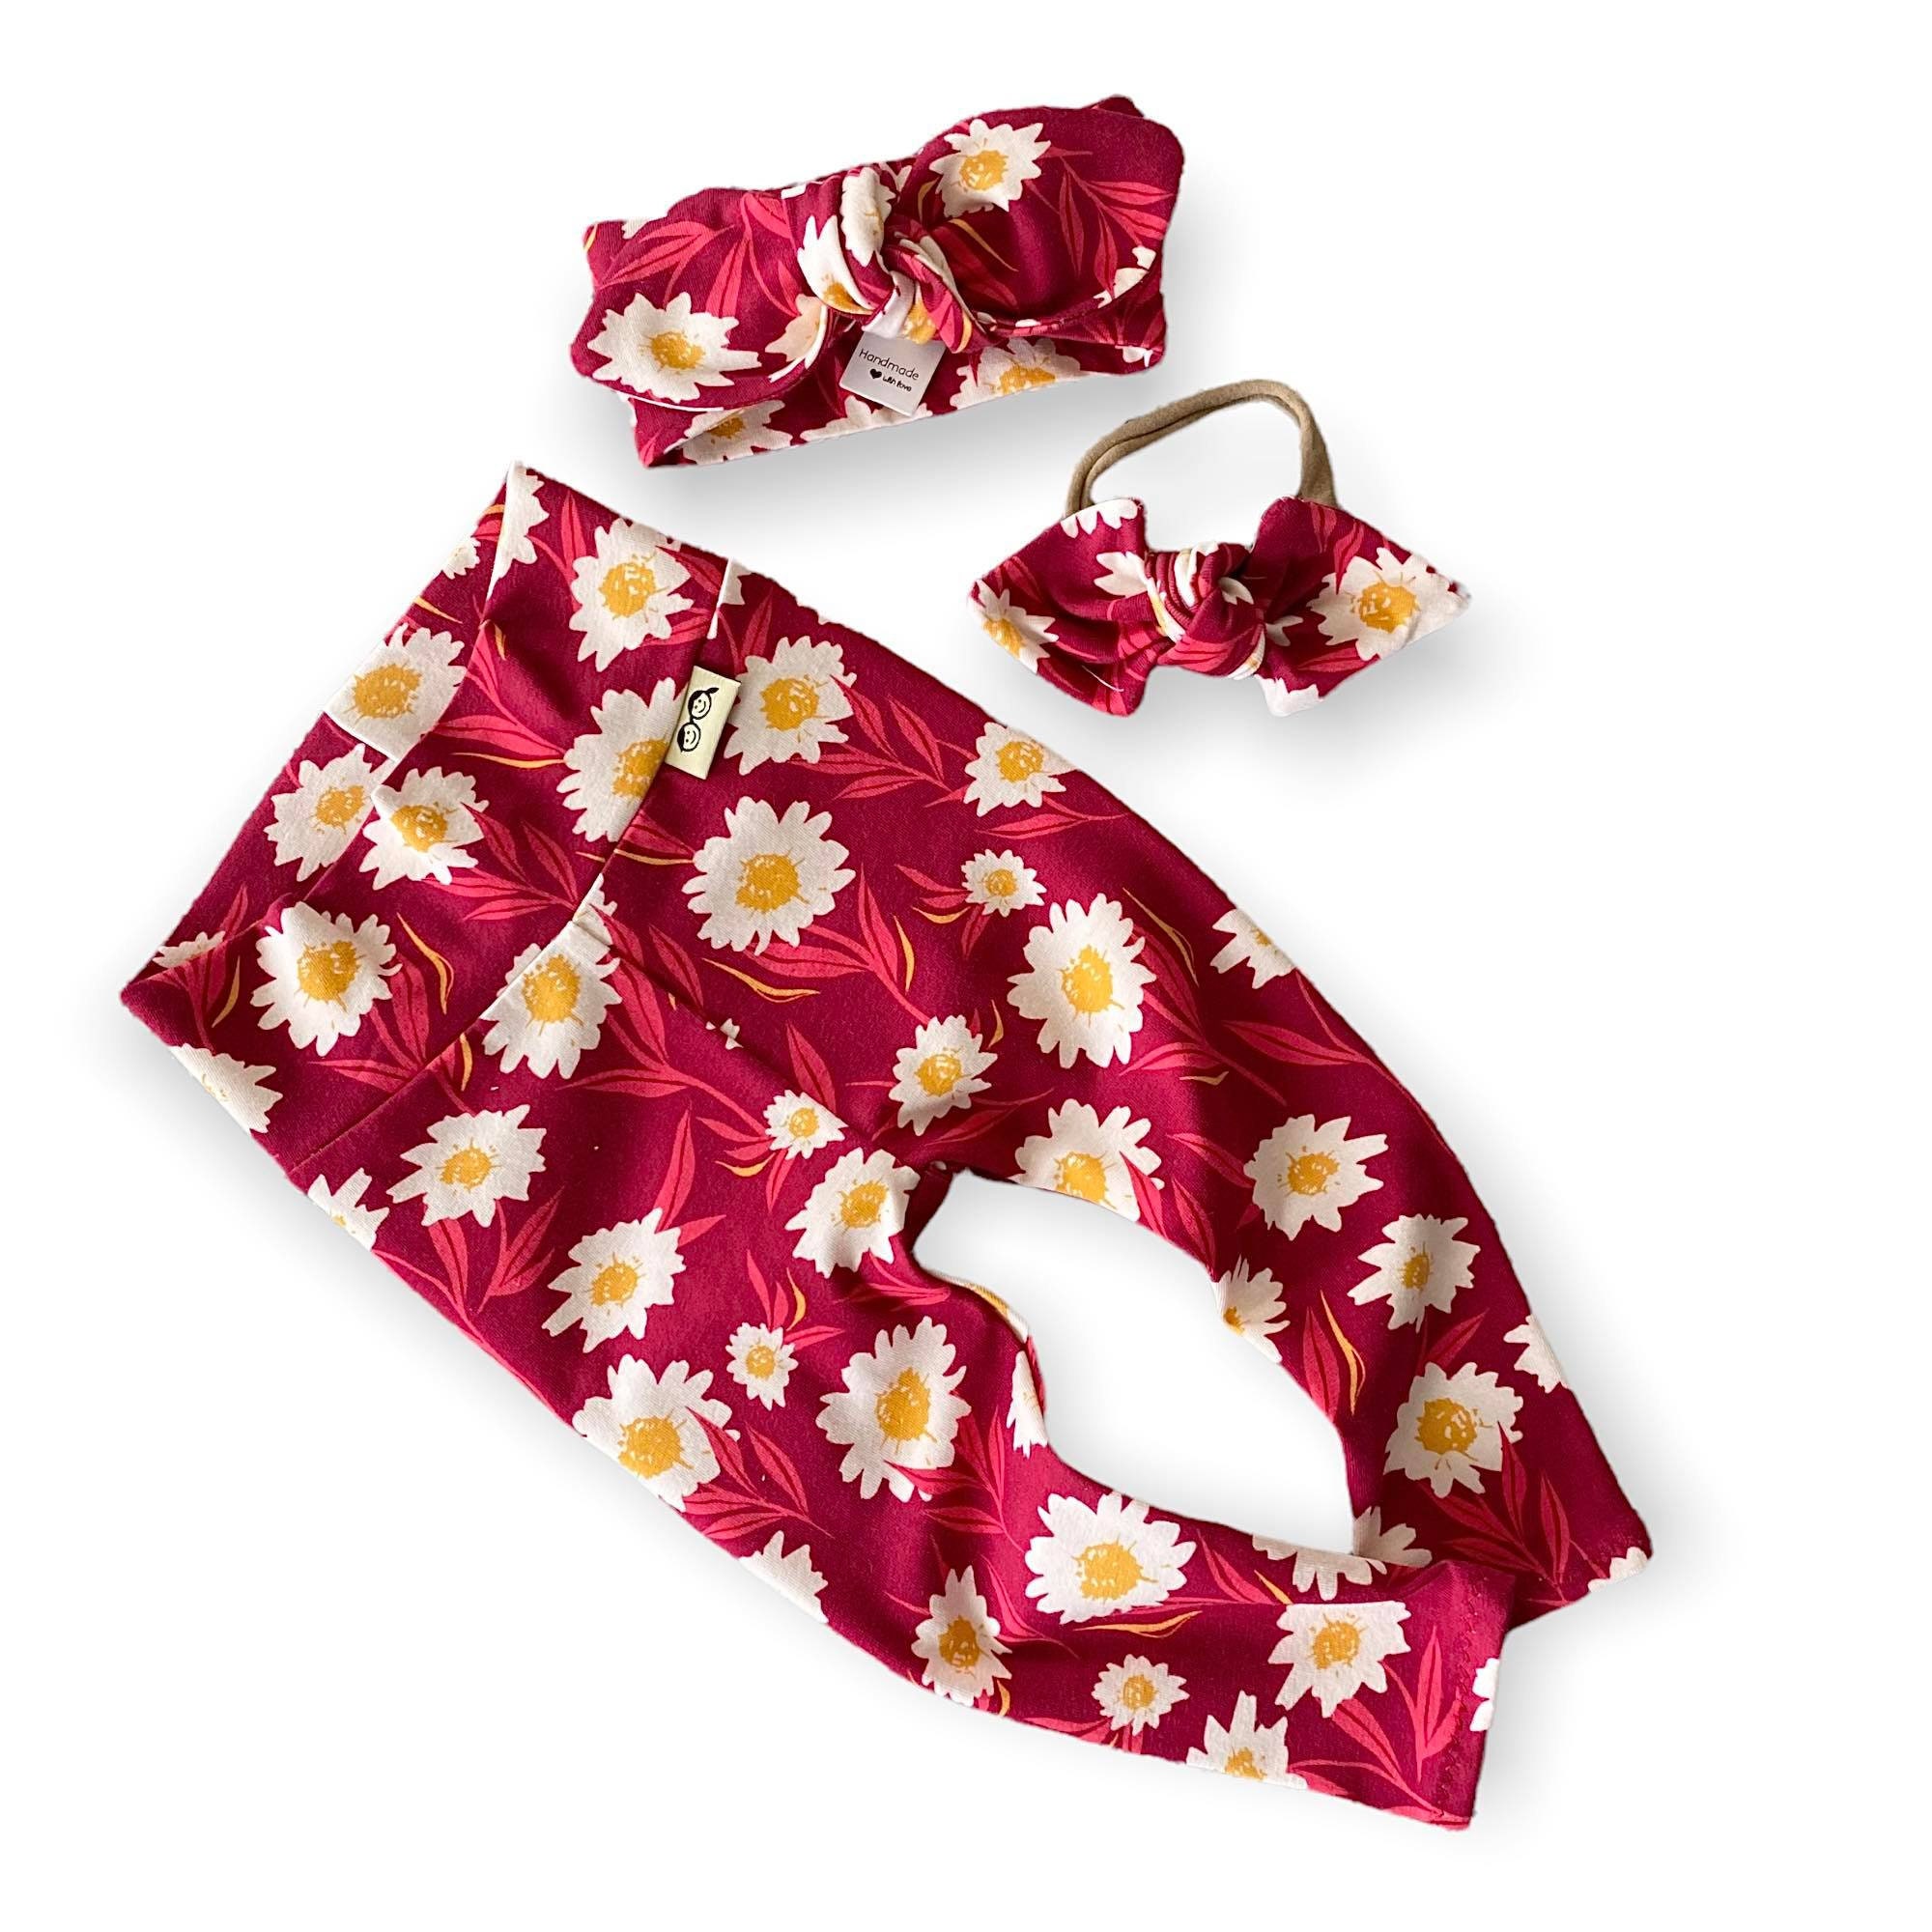 Mums Flowers on Burgundy Leggings And/or Top Knot Headband Set